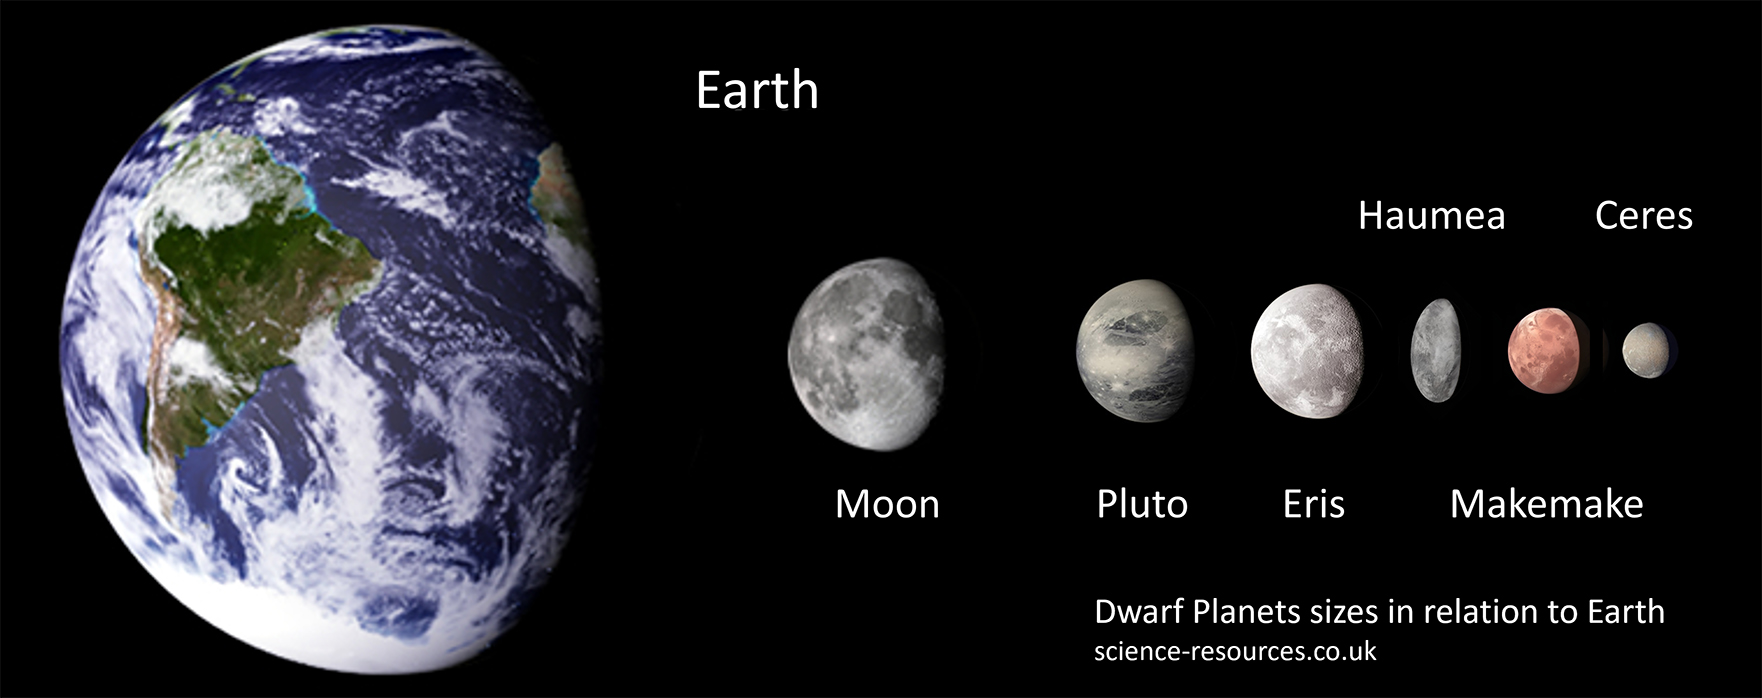 Dwarf Planet sizes compared to the Earth.